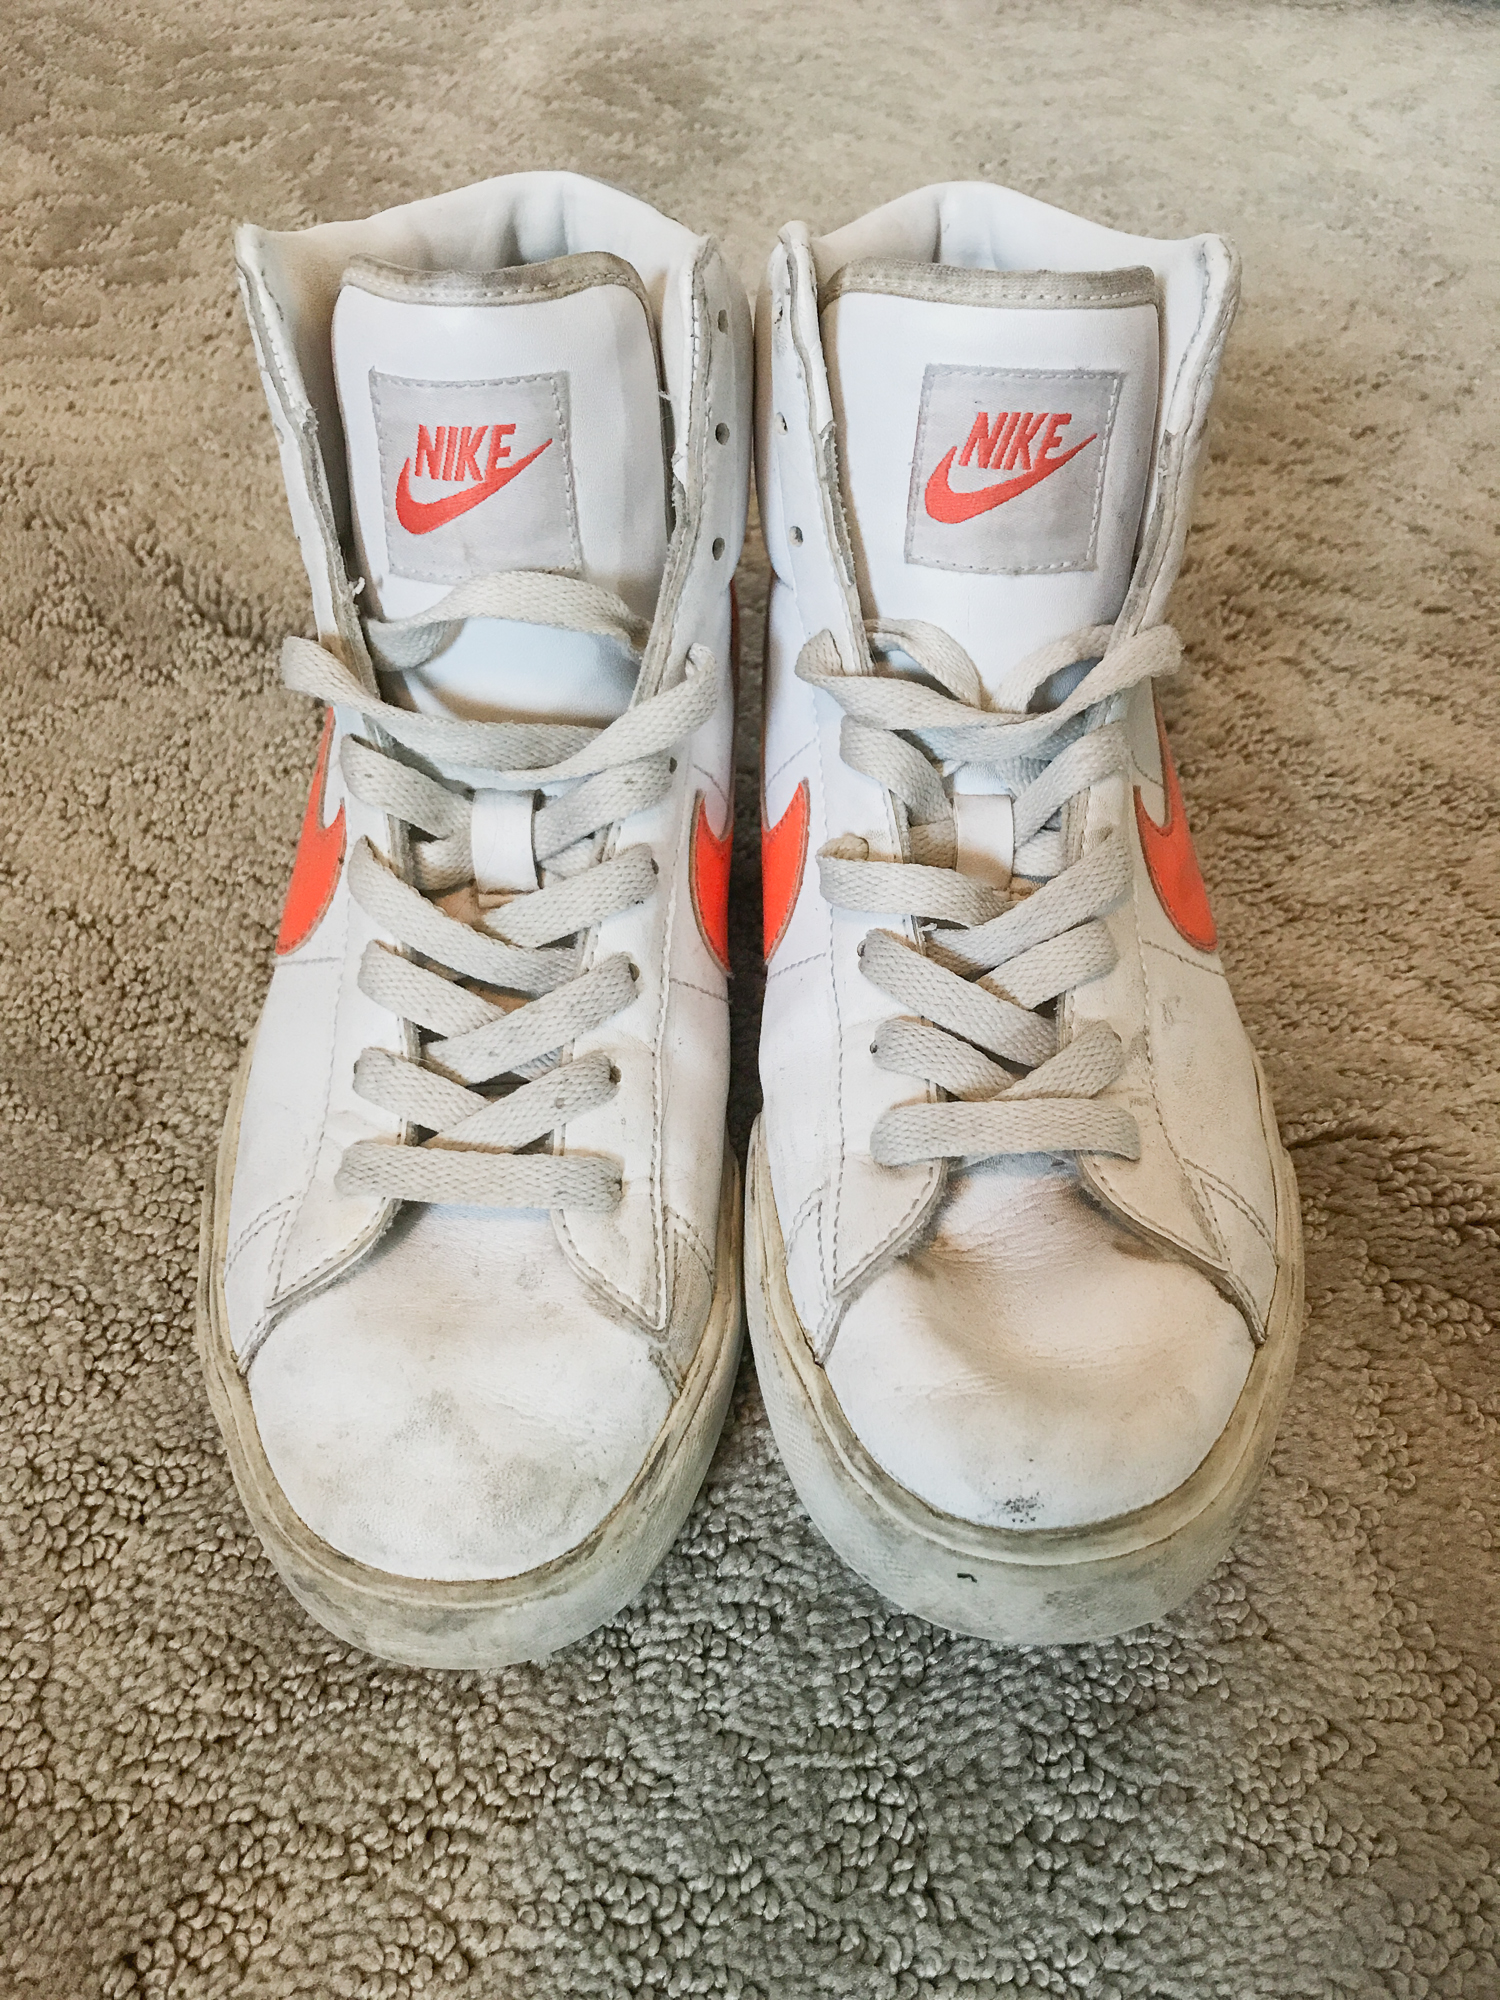 Old Nike Shoes | Painting DIY 